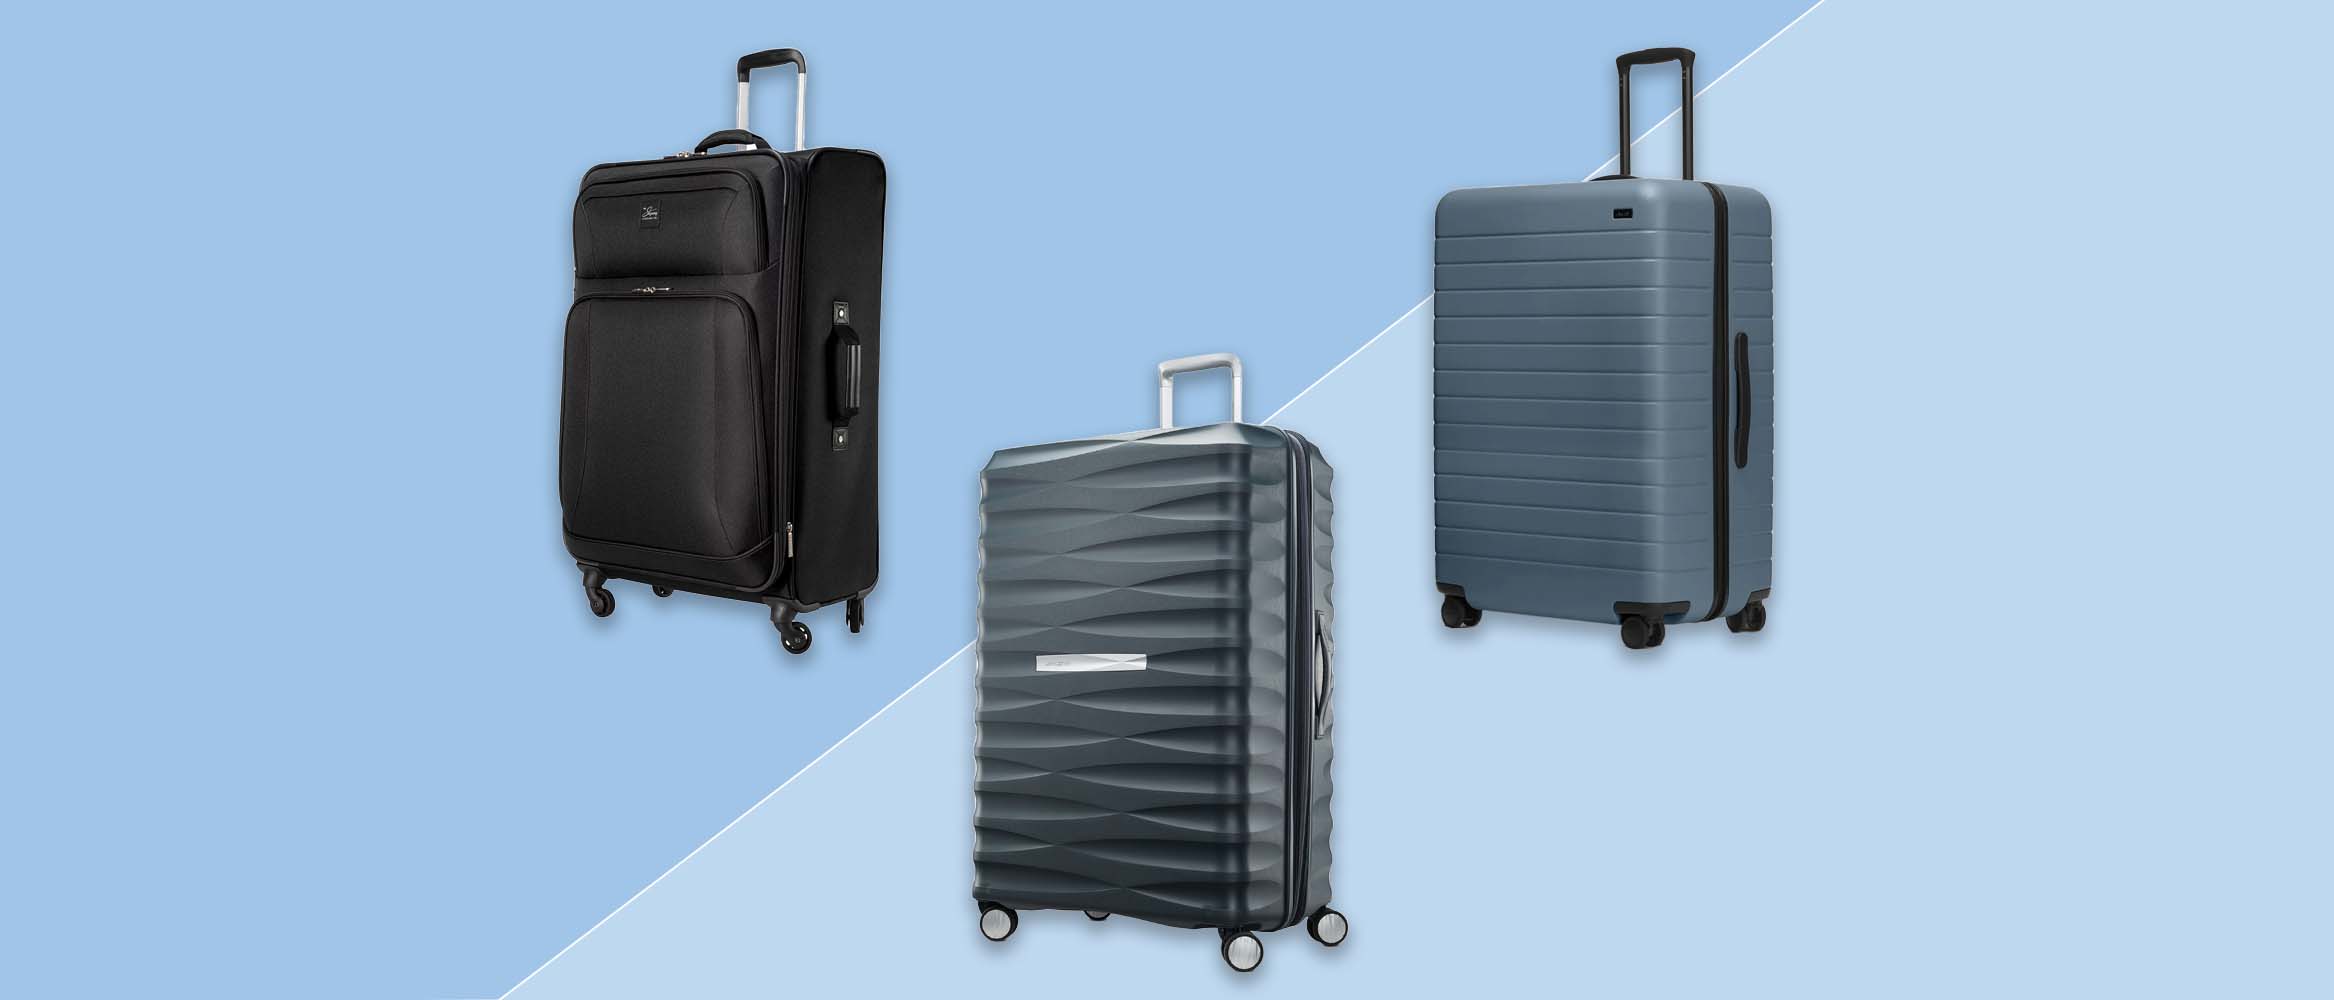 three suitcases from Skyway, Samsonite and Away